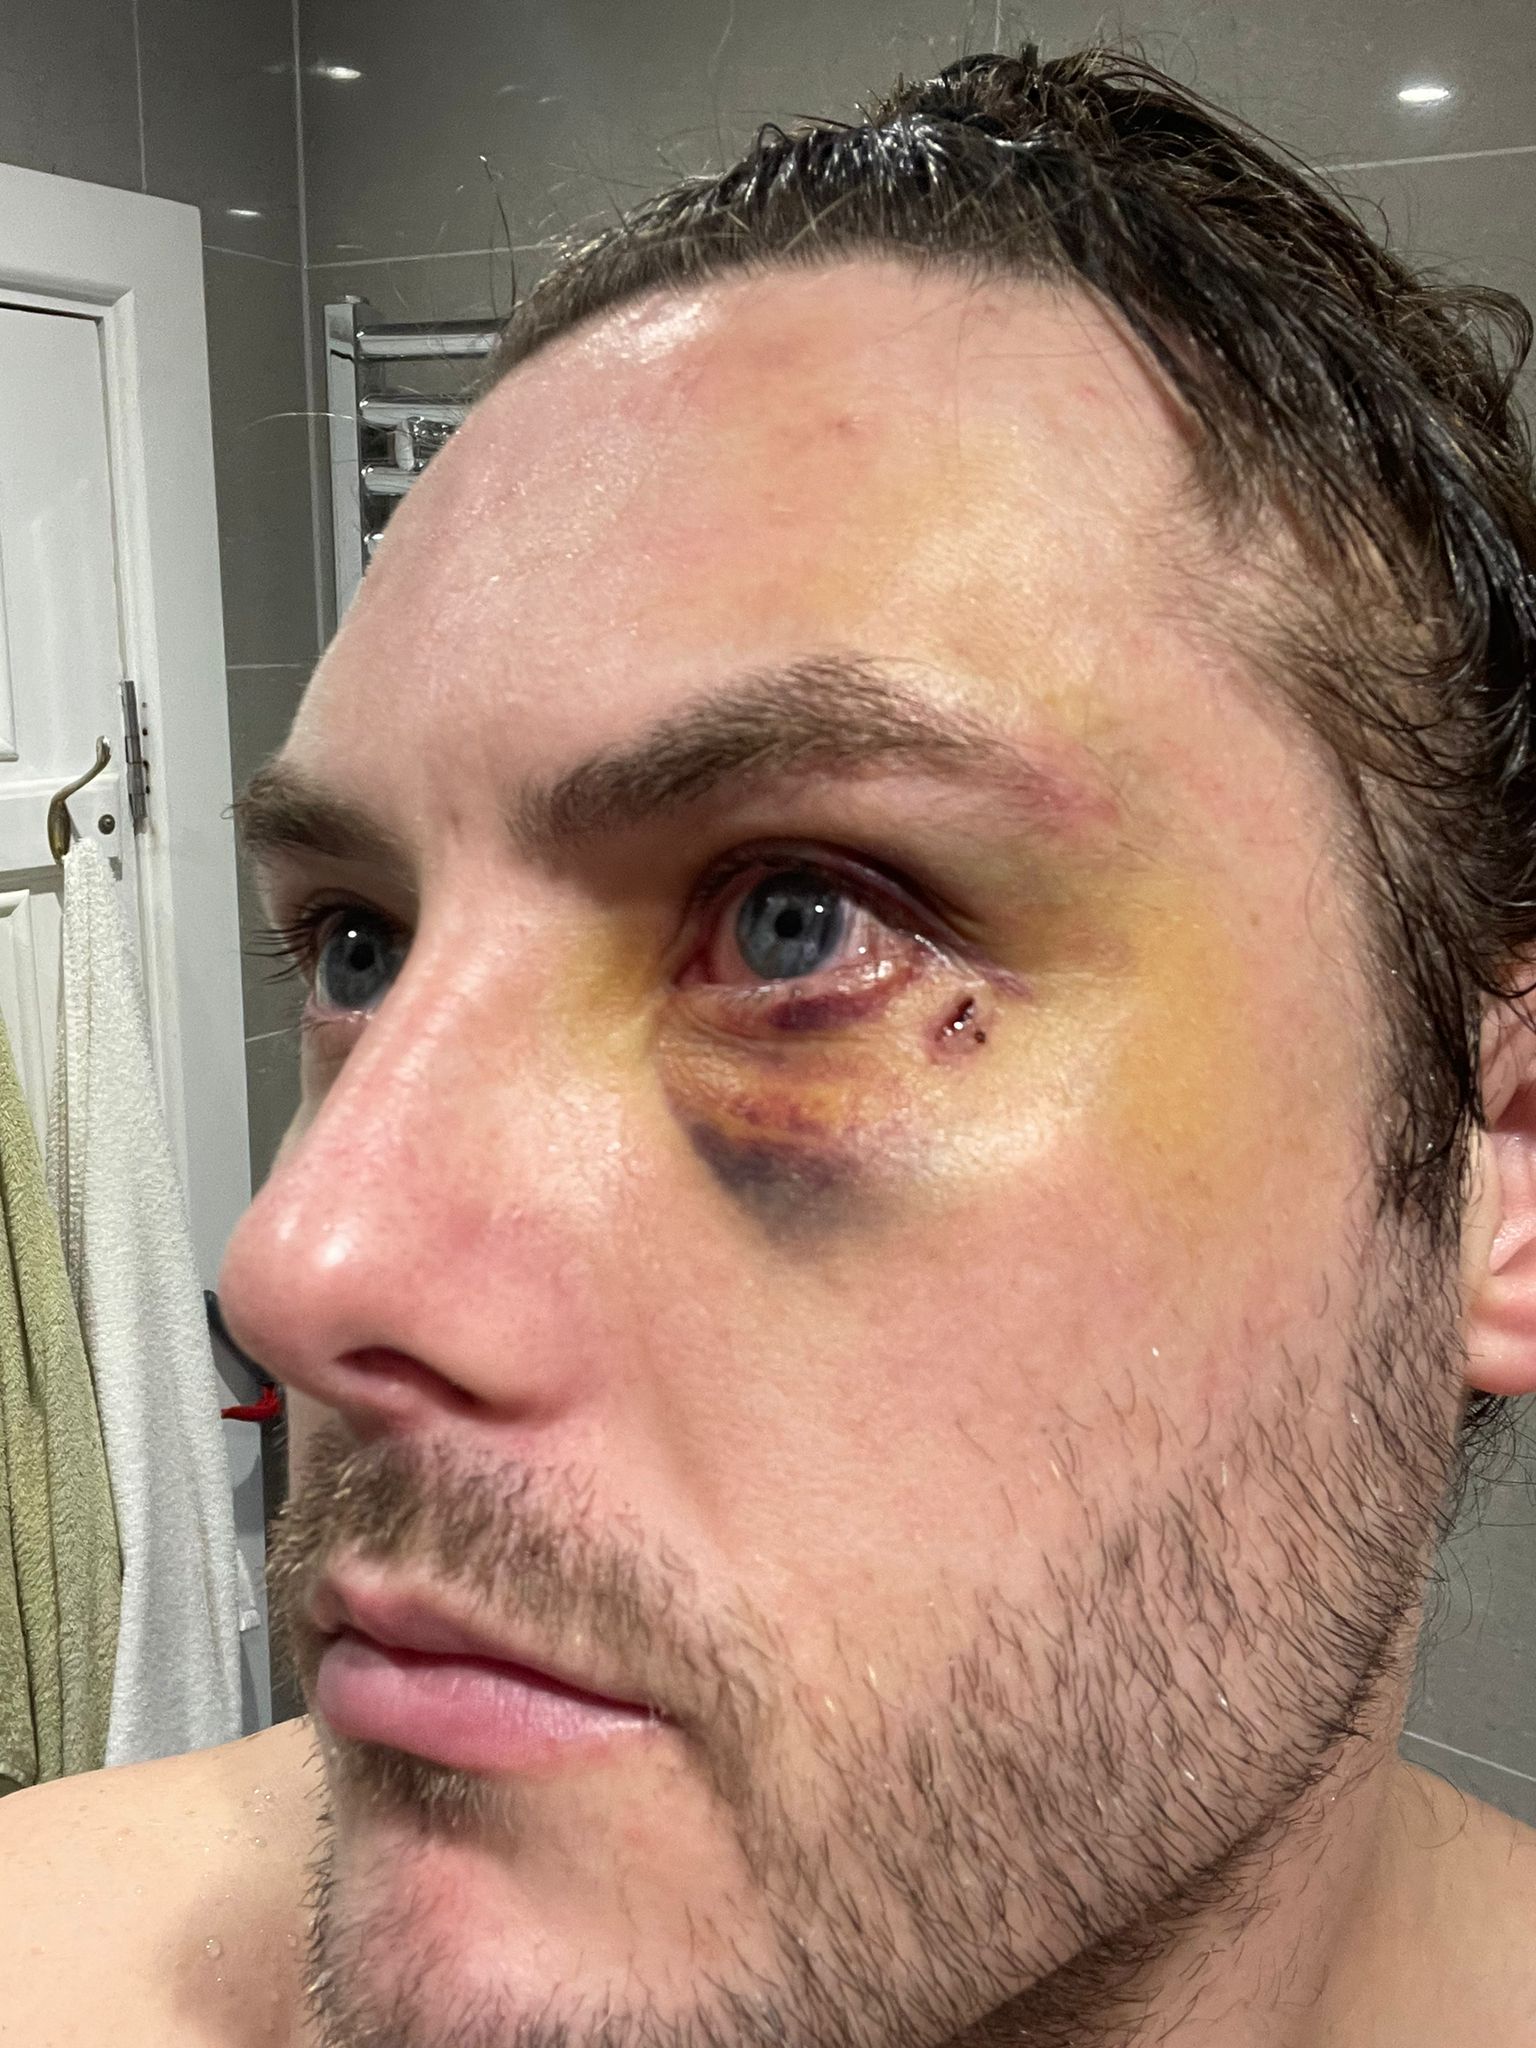 Cuts and bruises on Alan Hunter's face